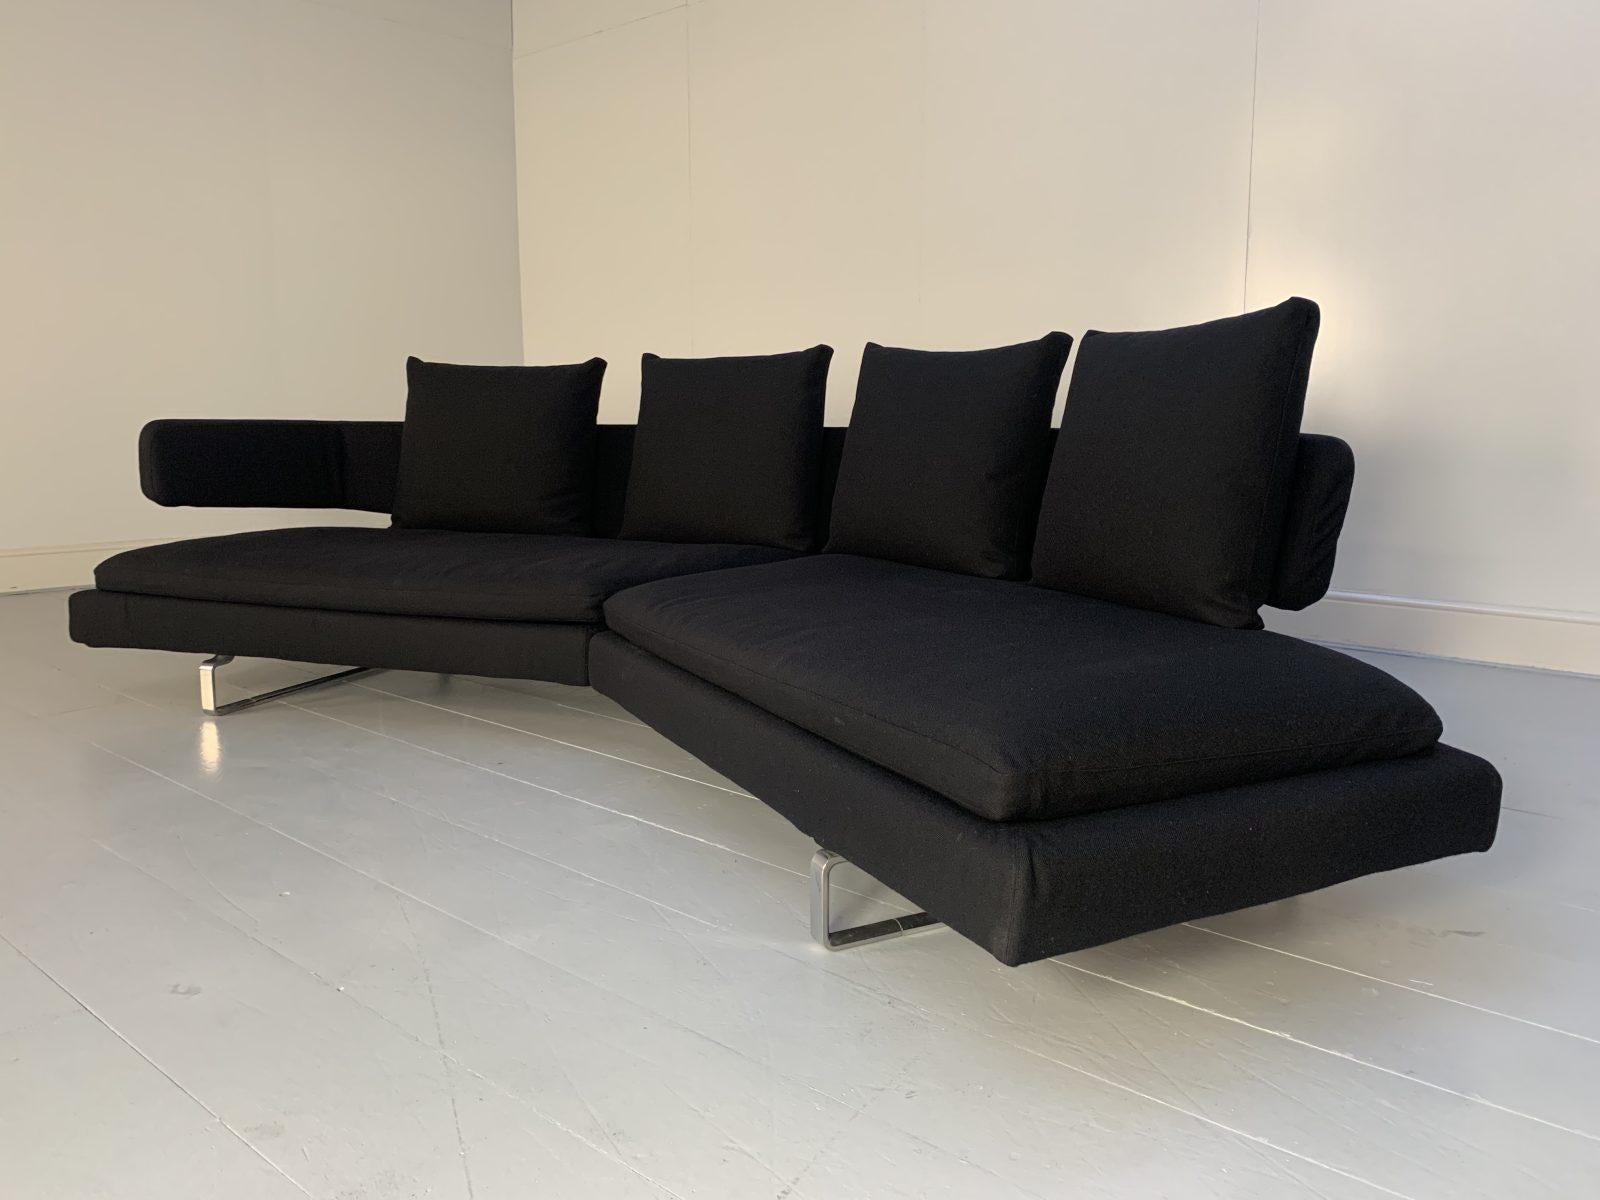 Contemporary B&B Italia “Arne A320CS” 3-Seat Curved Sofa, in Black Wool For Sale